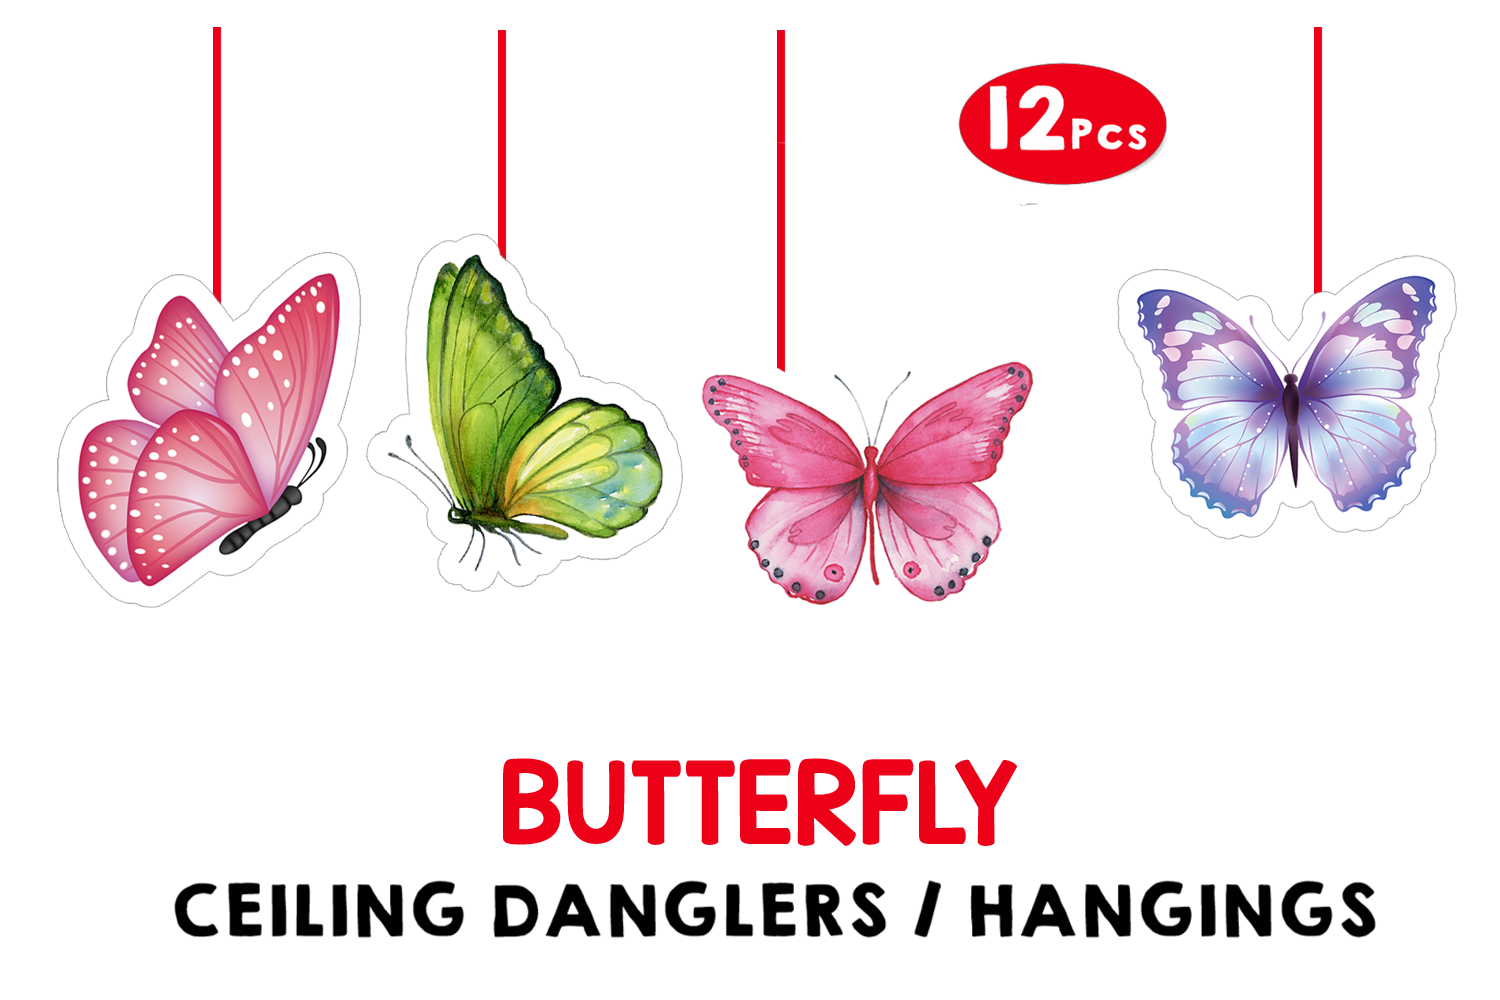 Butterfly Theme Hangings / Danglers #2 (12 Pcs)-(non-customised)